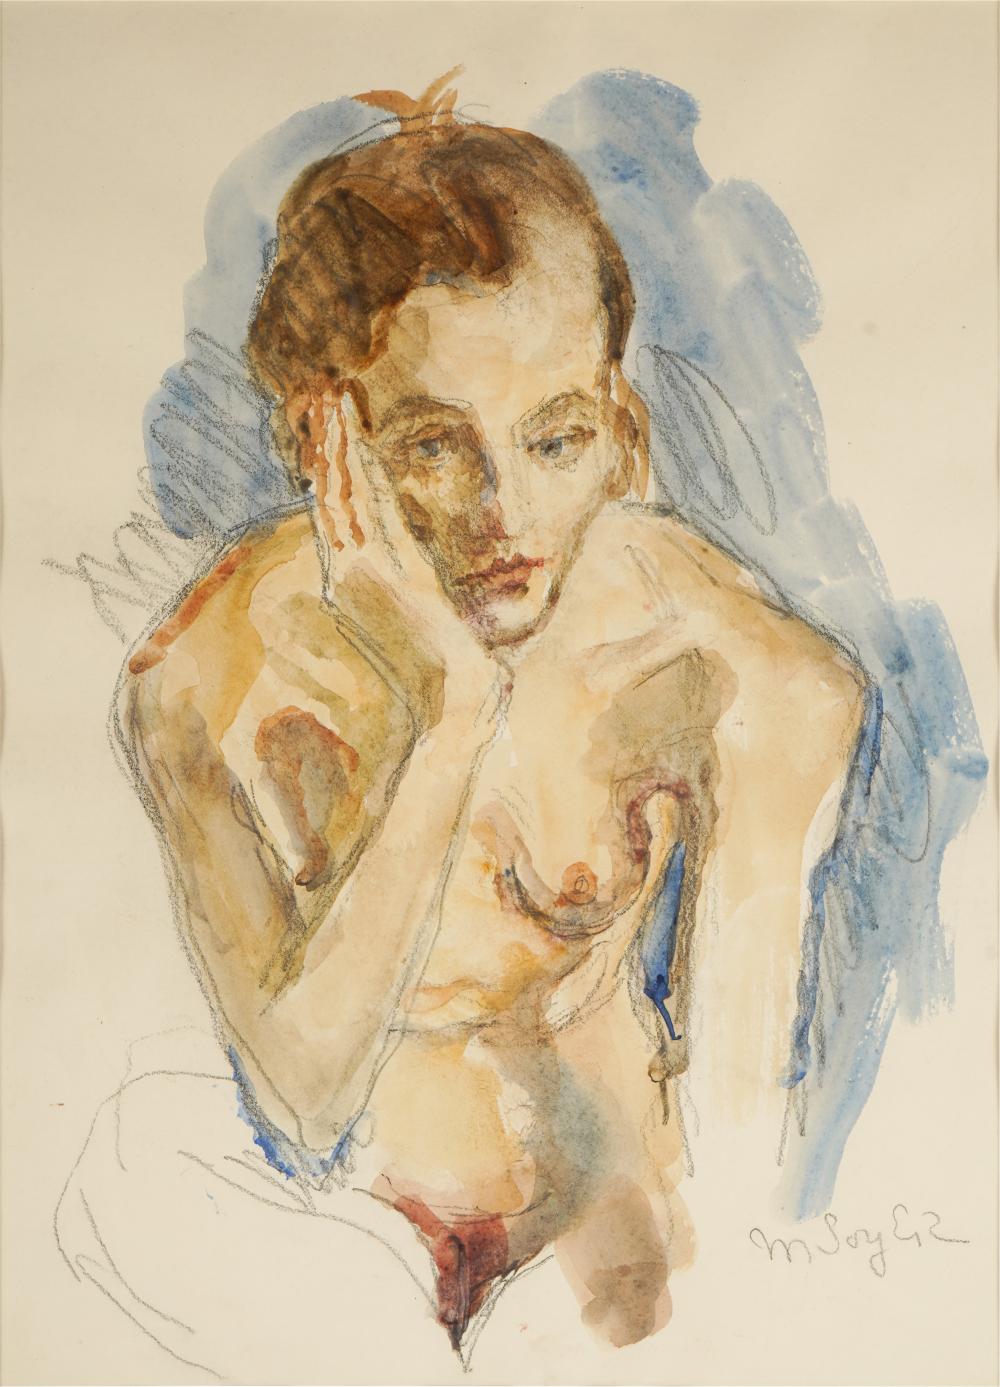 MOSES SOYER 1899 1974 THOUGHTFUL 326f2d